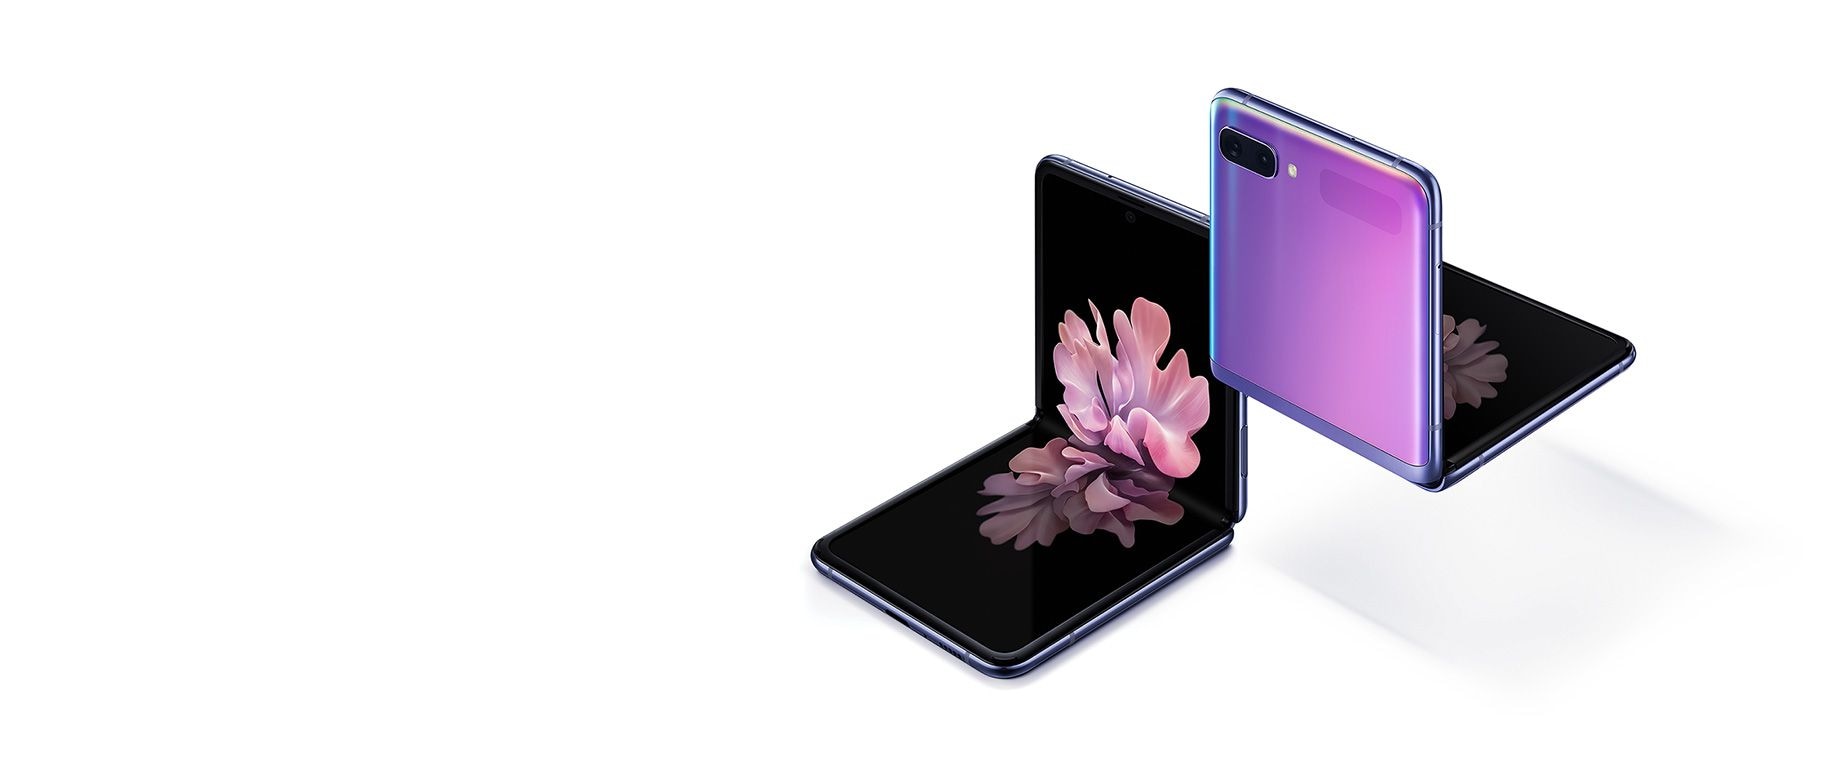 Two Galaxy Z Flip phones in Mirror Purple at a three-quarter angle, one seen from the front and one seen from the rear. Both are folded at right angles with freestop folding. The one seen from the front has the blossoming flower wallpaper onscreen